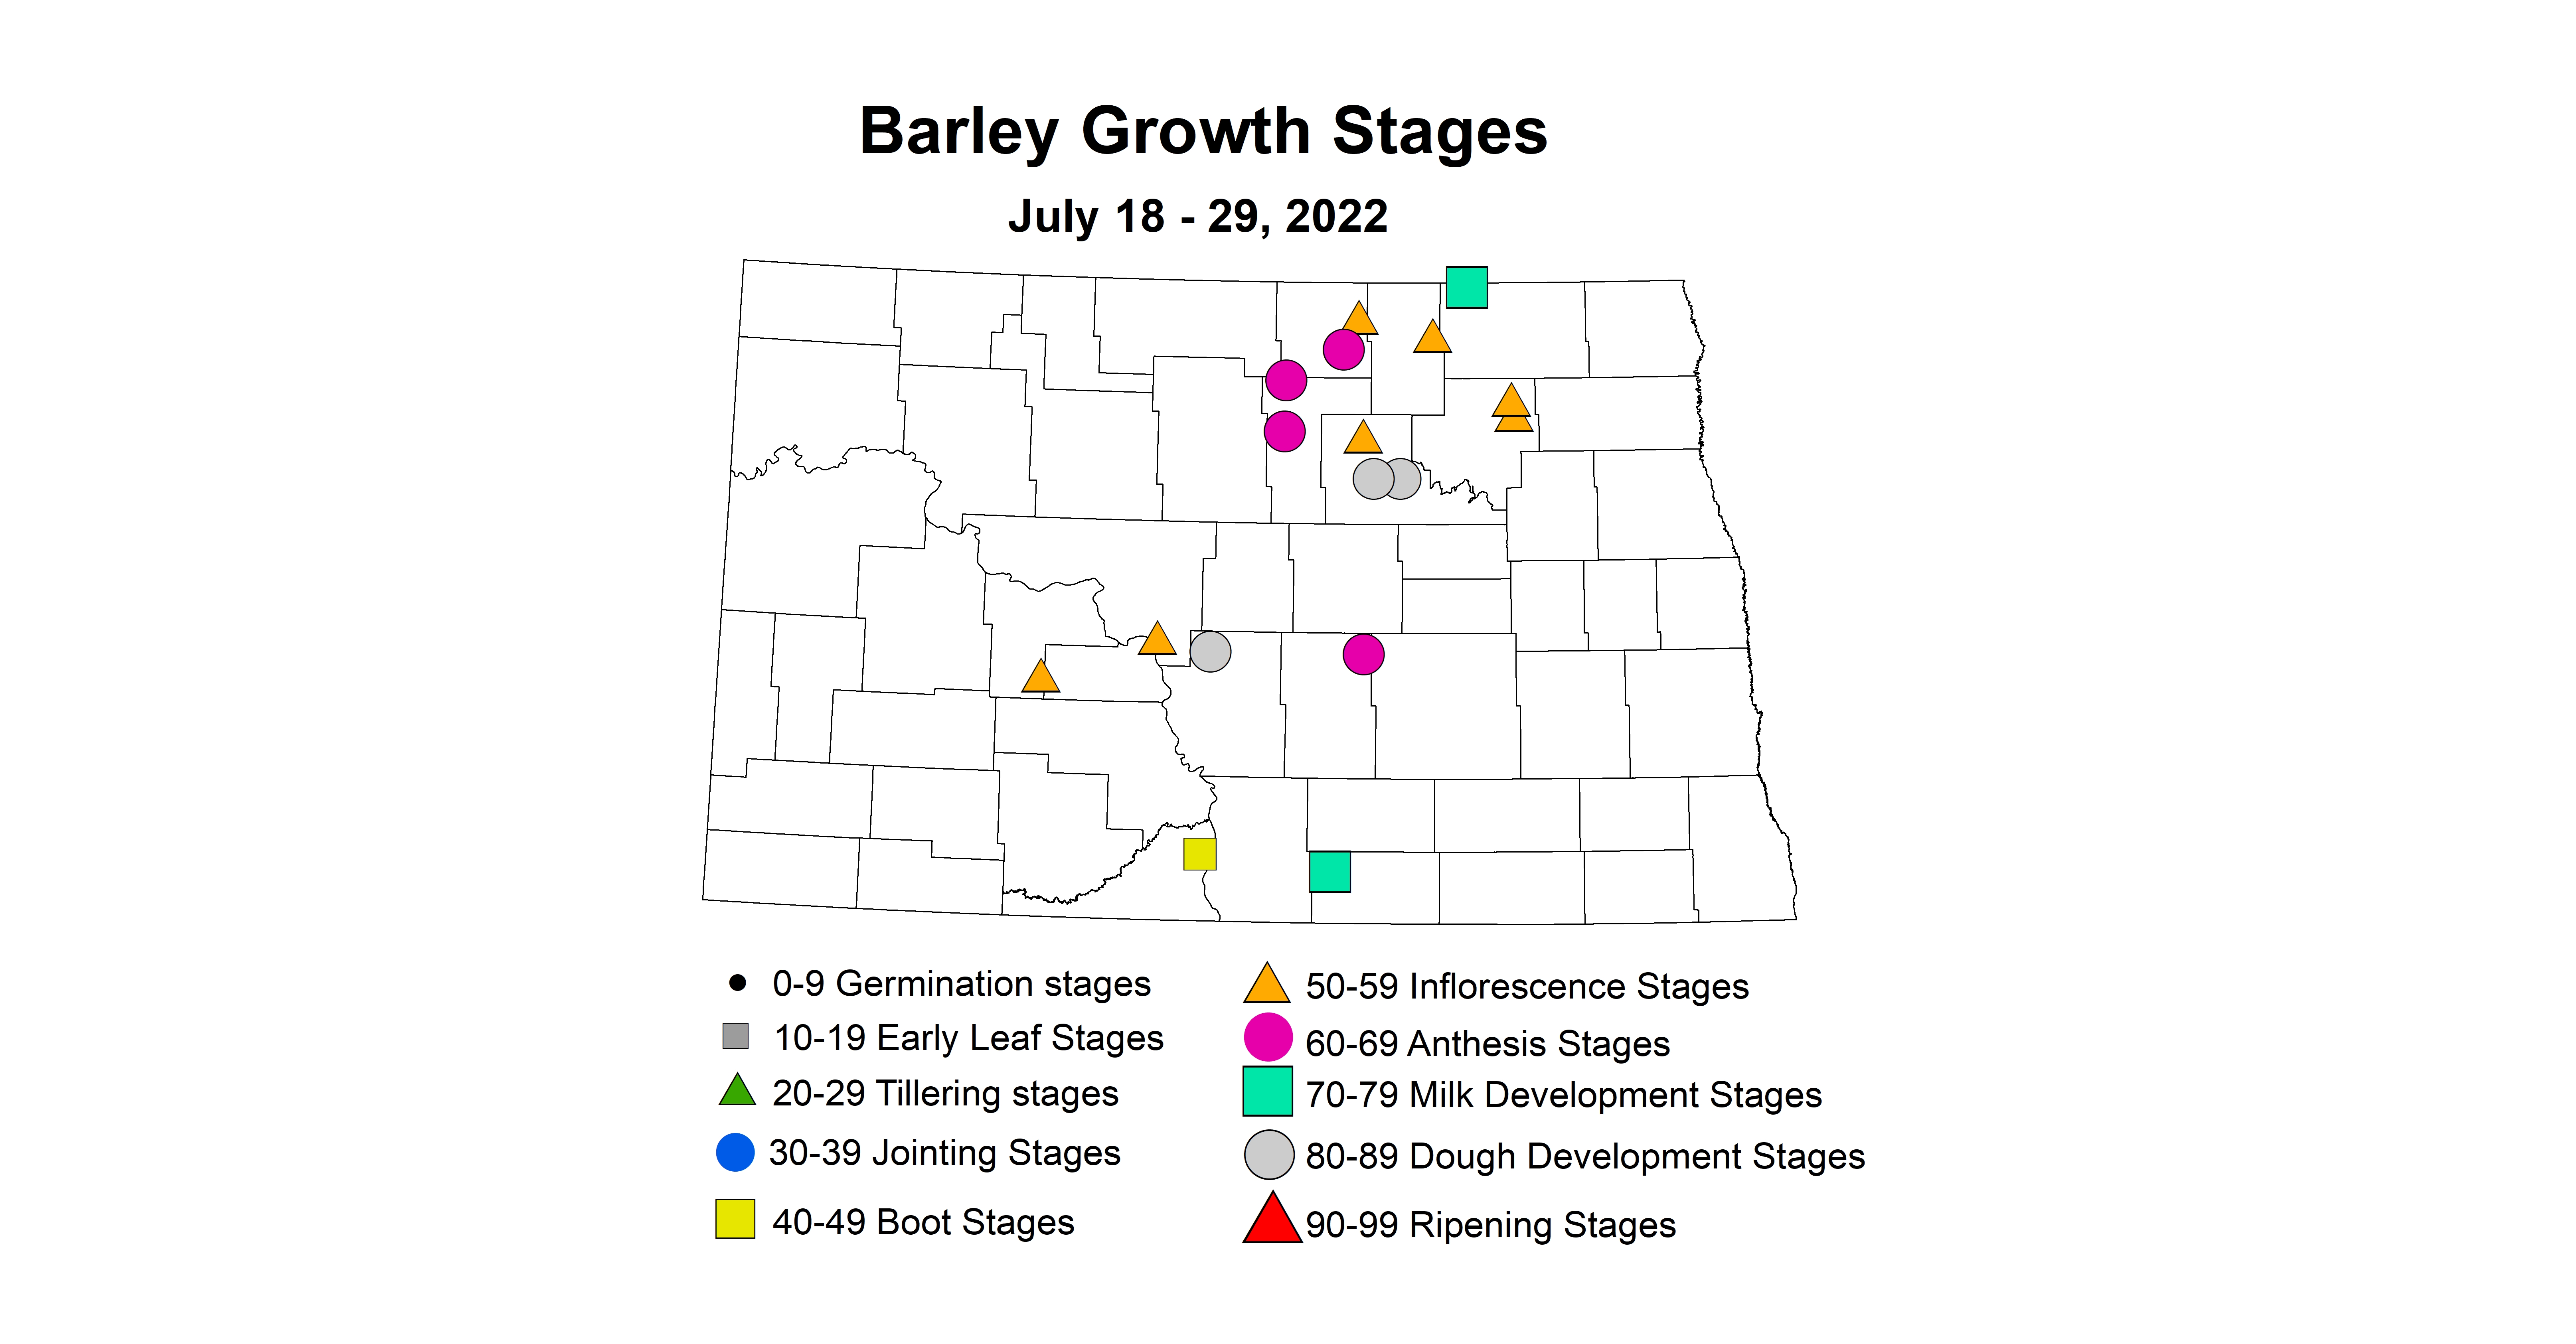 barley growth stages 2022 7.18-7.29